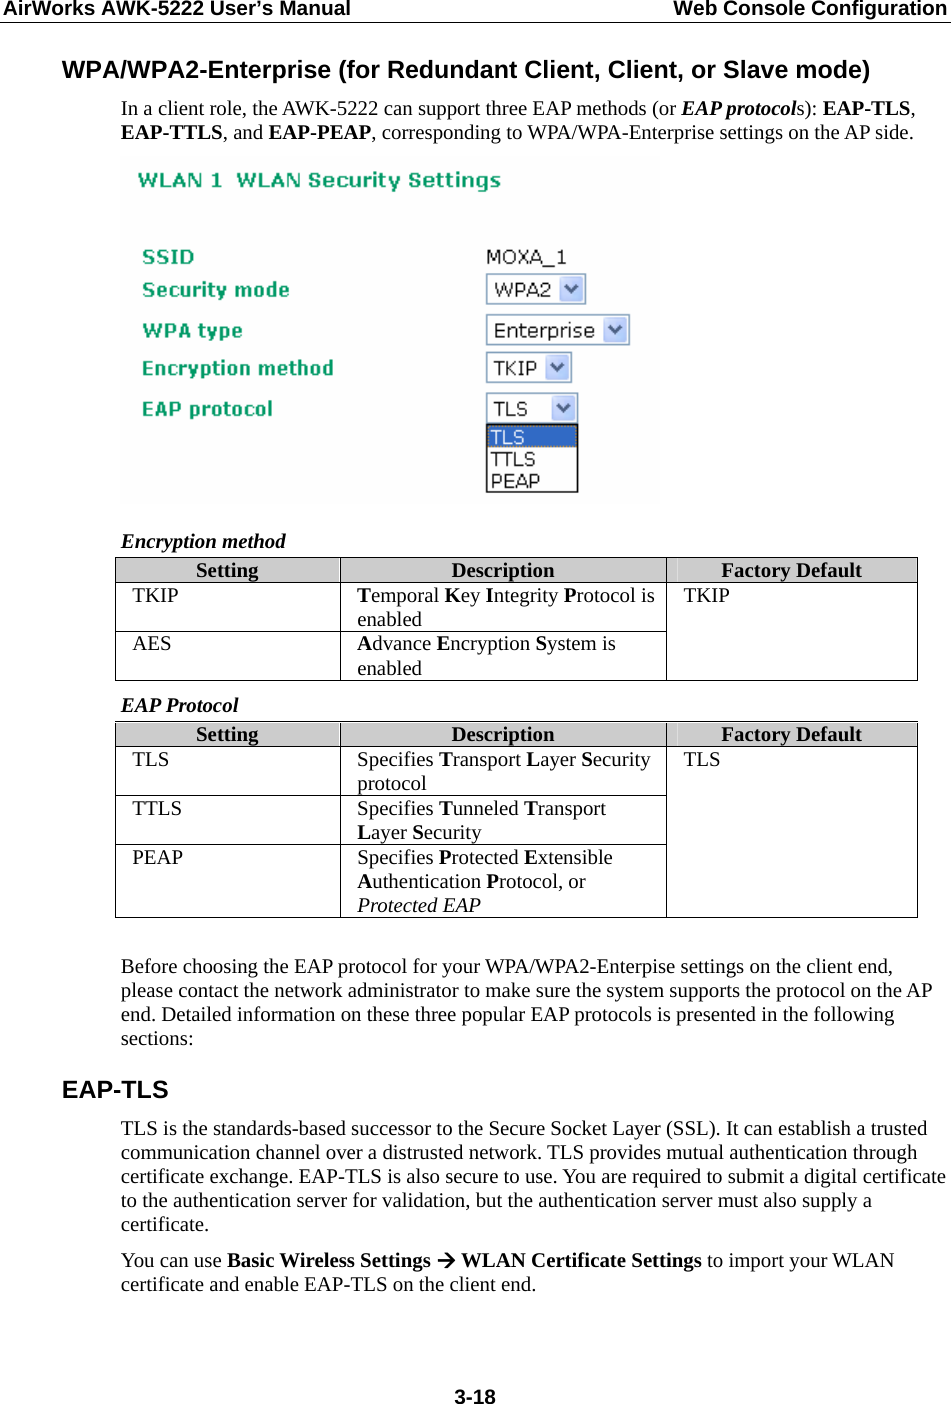 AirWorks AWK-5222 User’s Manual  Web Console Configuration  3-18WPA/WPA2-Enterprise (for Redundant Client, Client, or Slave mode) In a client role, the AWK-5222 can support three EAP methods (or EAP protocols): EAP-TLS, EAP-TTLS, and EAP-PEAP, corresponding to WPA/WPA-Enterprise settings on the AP side.  Encryption method Setting  Description  Factory Default TKIP  Temporal Key Integrity Protocol is enabled AES  Advance Encryption System is enabled TKIP EAP Protocol Setting  Description  Factory Default TLS Specifies Transport Layer Security protocol TTLS Specifies Tunneled Transport Layer Security PEAP Specifies Protected Extensible Authentication Protocol, or Protected EAP TLS  Before choosing the EAP protocol for your WPA/WPA2-Enterpise settings on the client end, please contact the network administrator to make sure the system supports the protocol on the AP end. Detailed information on these three popular EAP protocols is presented in the following sections: EAP-TLS TLS is the standards-based successor to the Secure Socket Layer (SSL). It can establish a trusted communication channel over a distrusted network. TLS provides mutual authentication through certificate exchange. EAP-TLS is also secure to use. You are required to submit a digital certificate to the authentication server for validation, but the authentication server must also supply a certificate. You can use Basic Wireless Settings Æ WLAN Certificate Settings to import your WLAN certificate and enable EAP-TLS on the client end. 